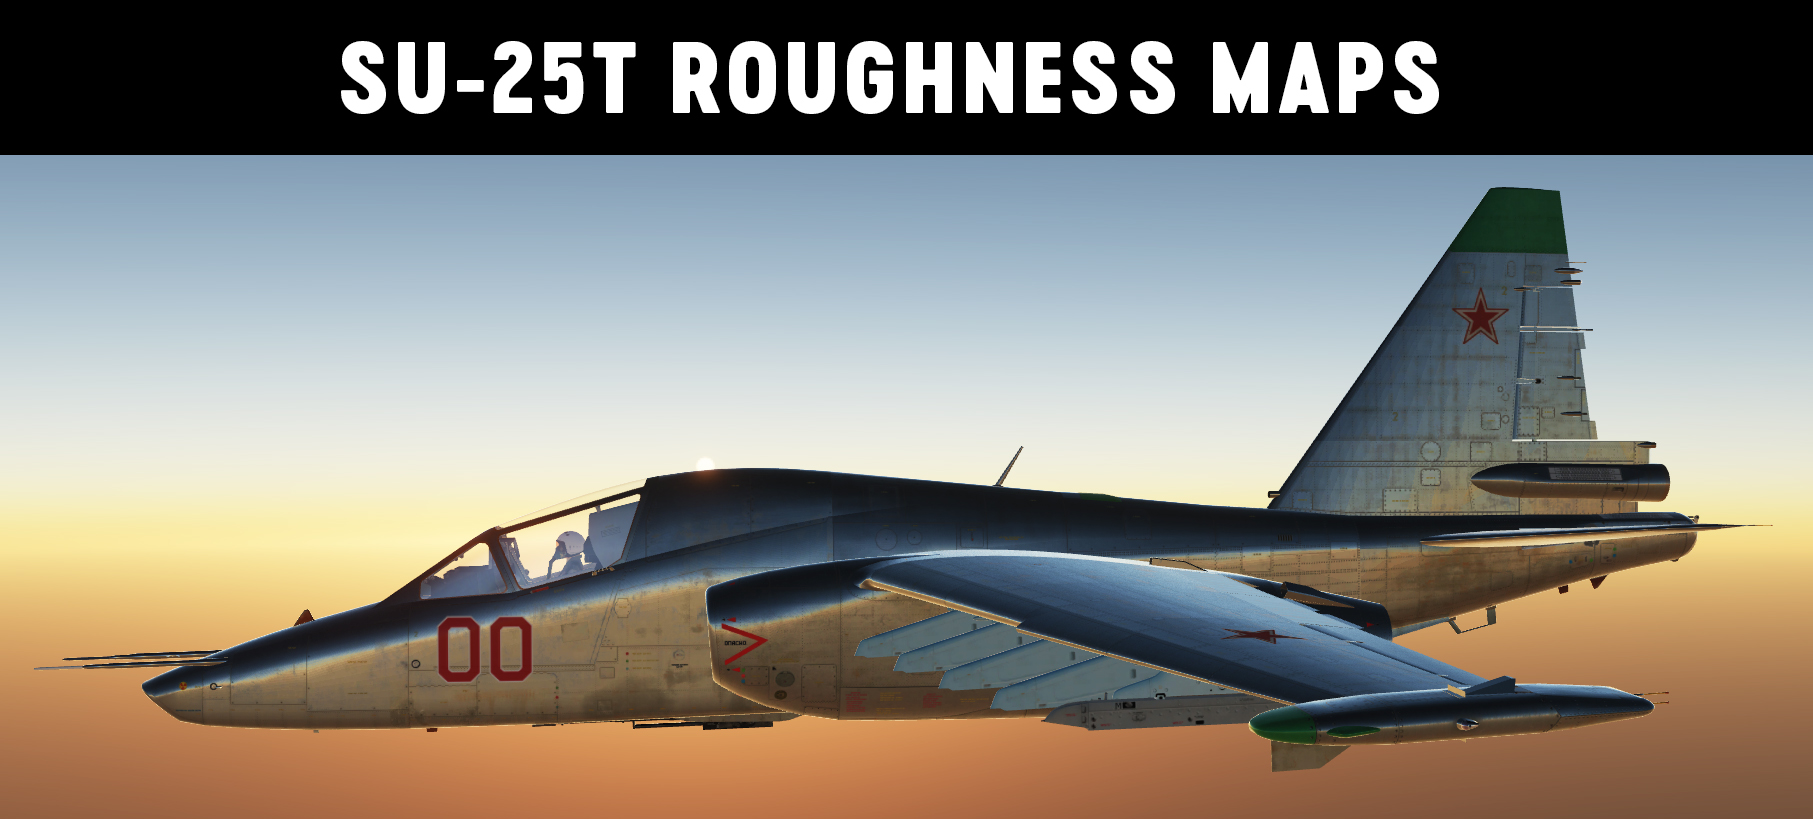 Default Roughness Maps for the SU-25T MOD